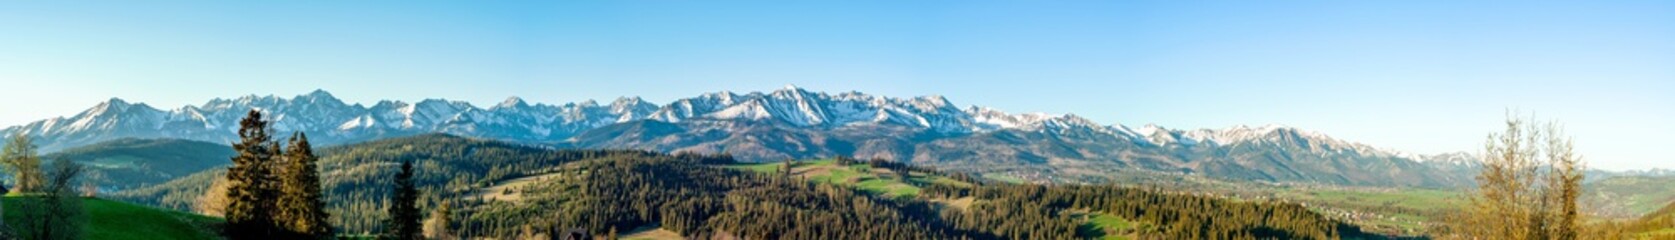 Extra wide panorama of the Tatra Mountains with trees, forests and meadows in Podhale region in Poland. Early morning in spring, sunrise light